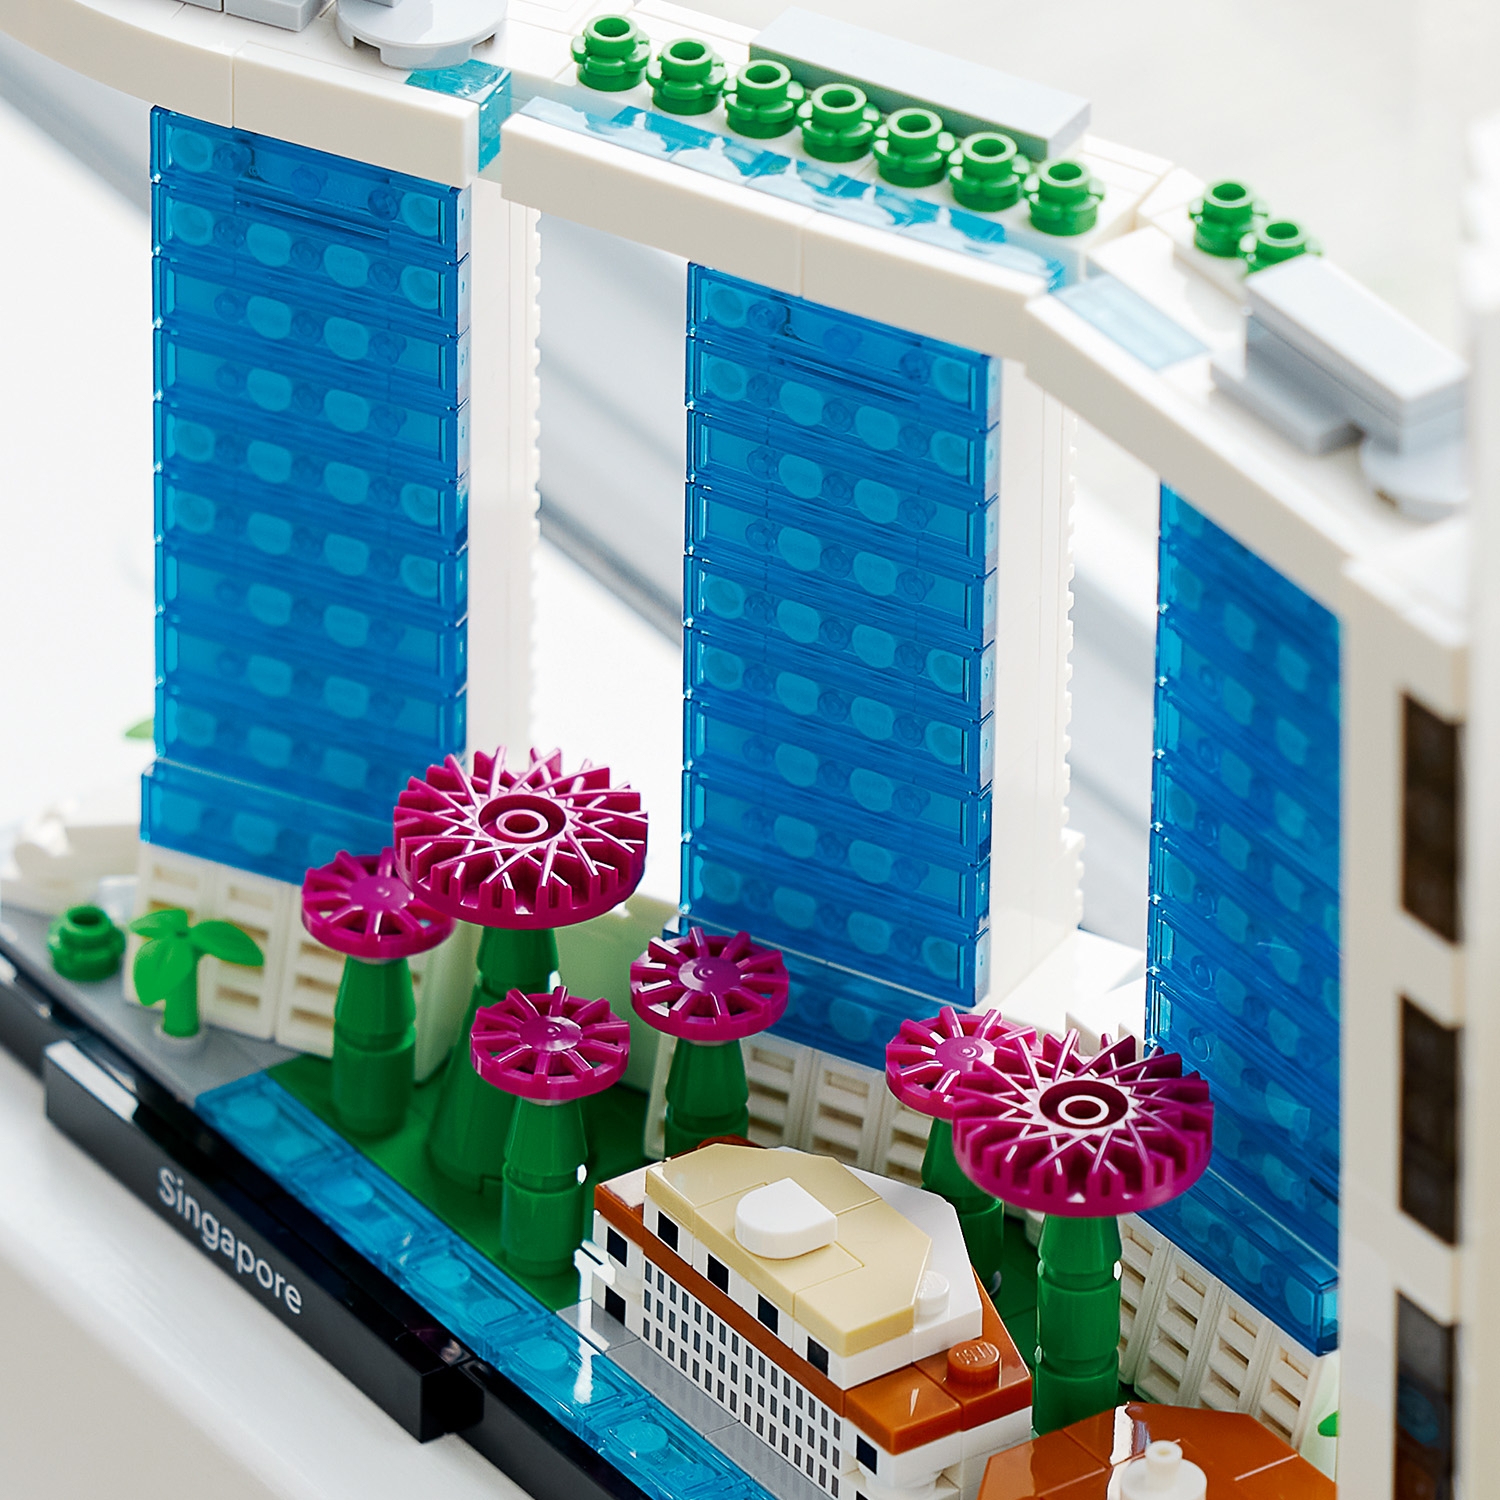 Singapore 21057 Architecture | Buy online at the LEGO® Shop US